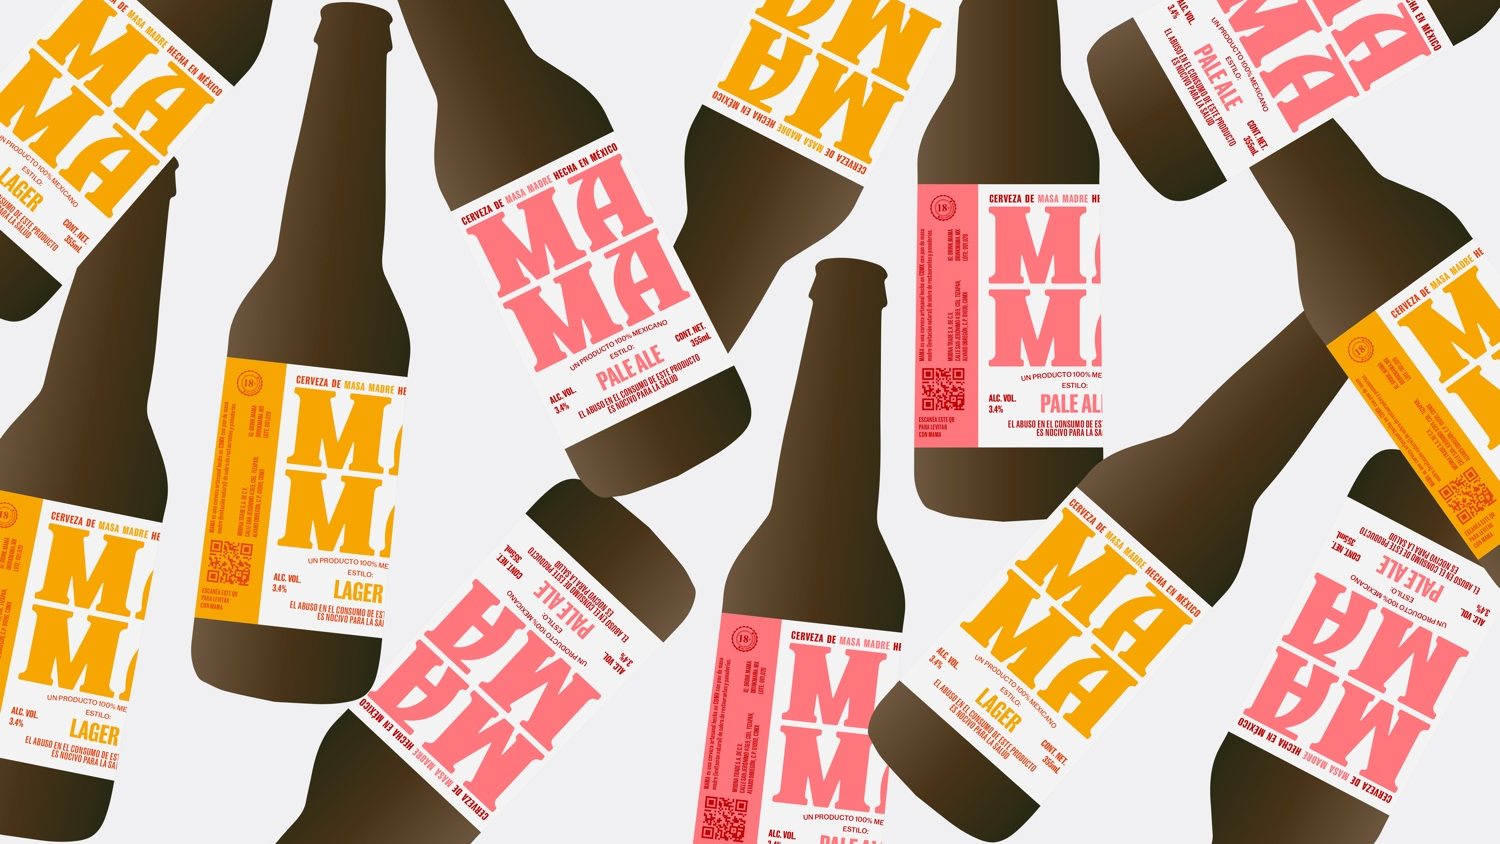 MAMA’s Beer Merges A Youthful Perspective With A Bold Attitude